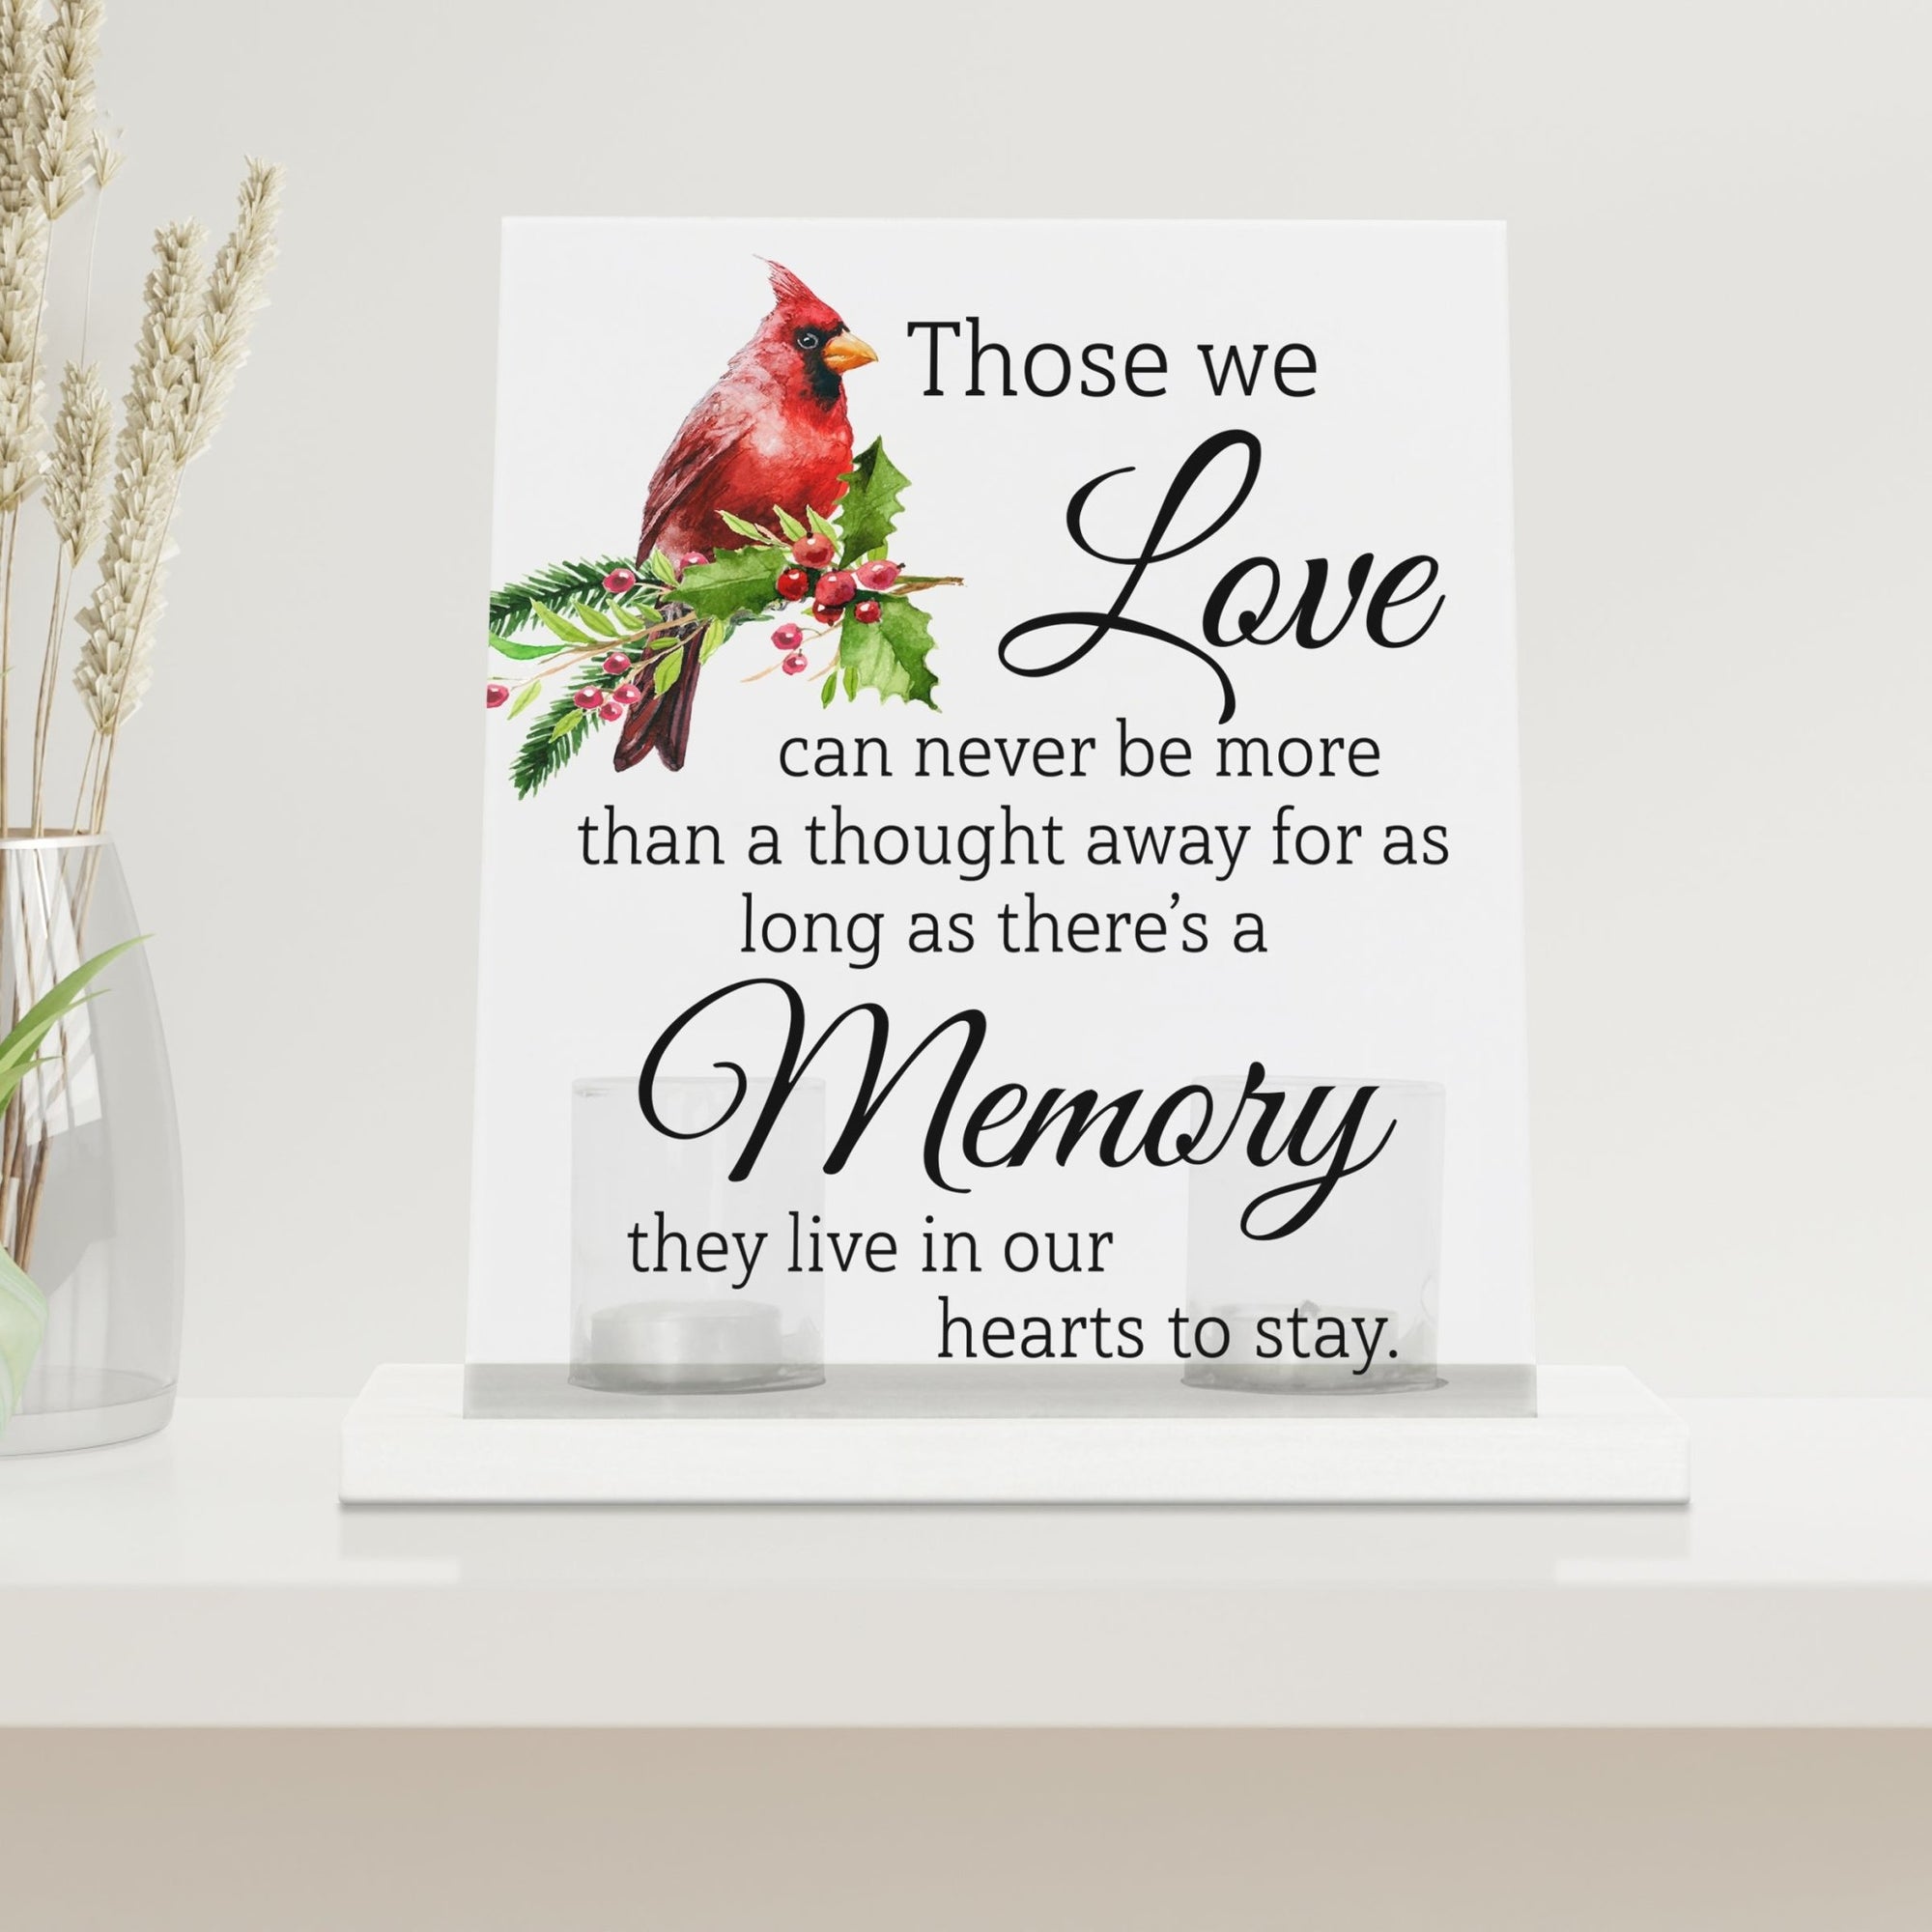 A unique and meaningful memorial gift for the loss of a loved one.